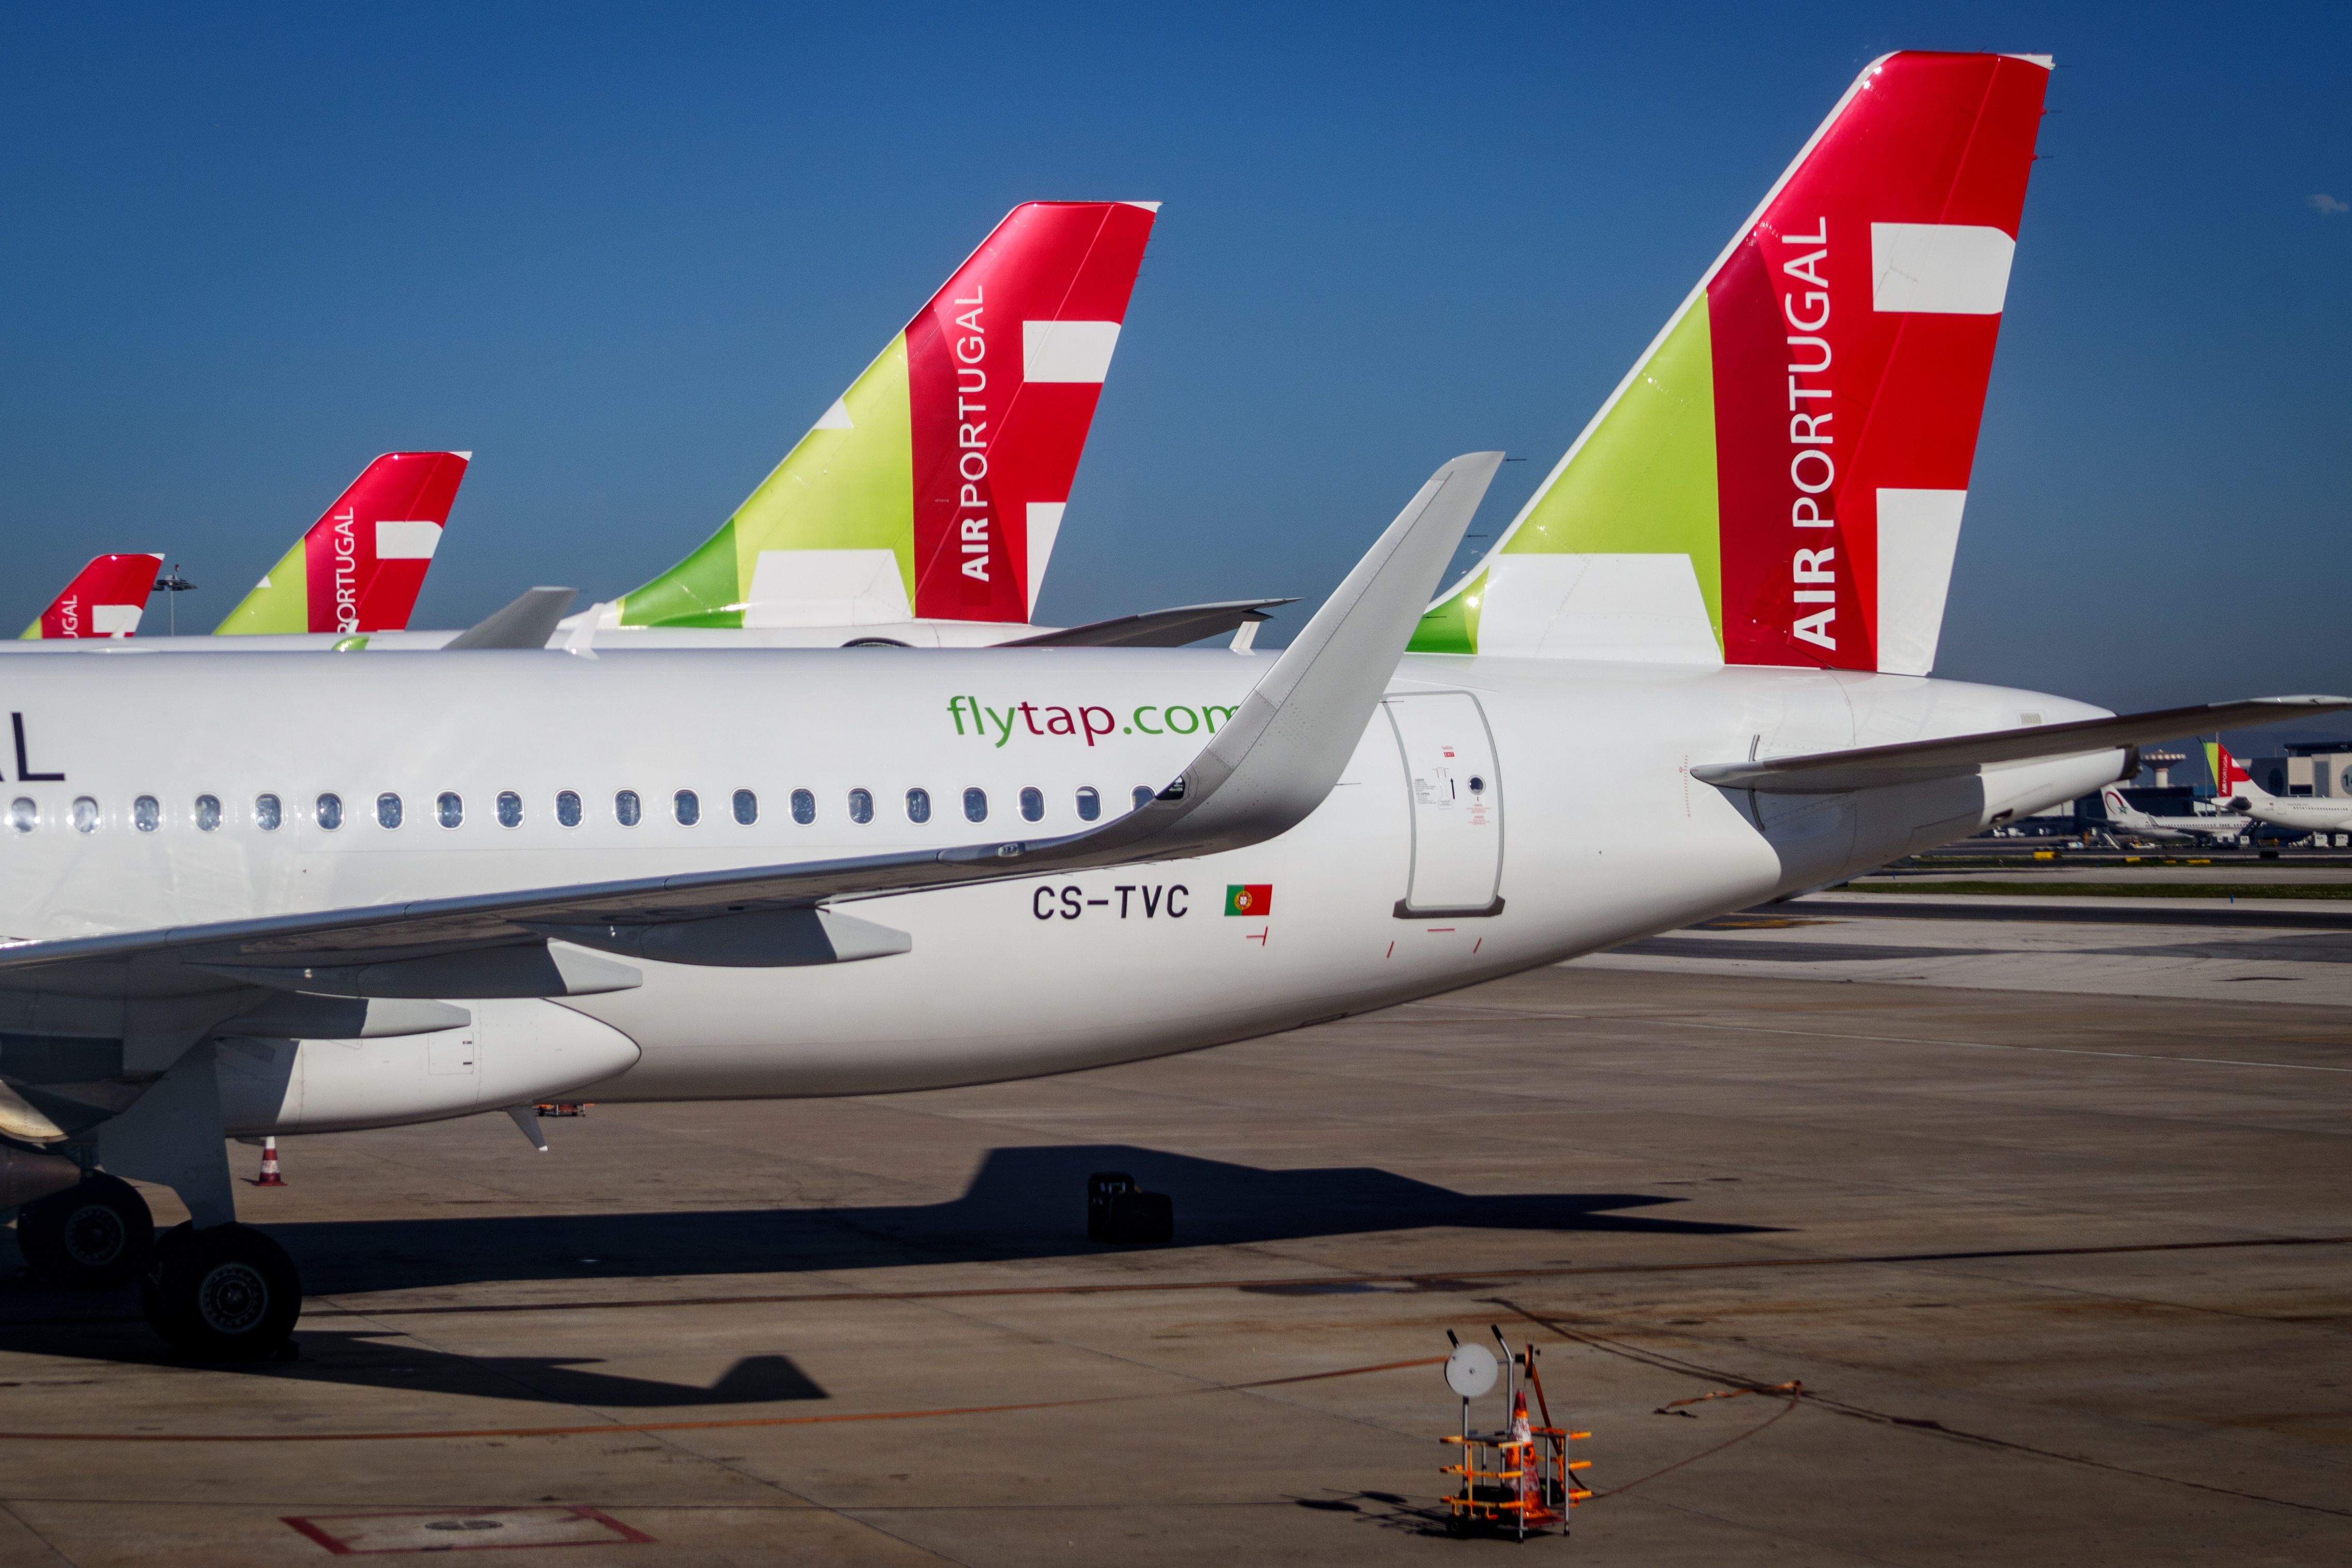 TAP Air Portugal aircraft parked